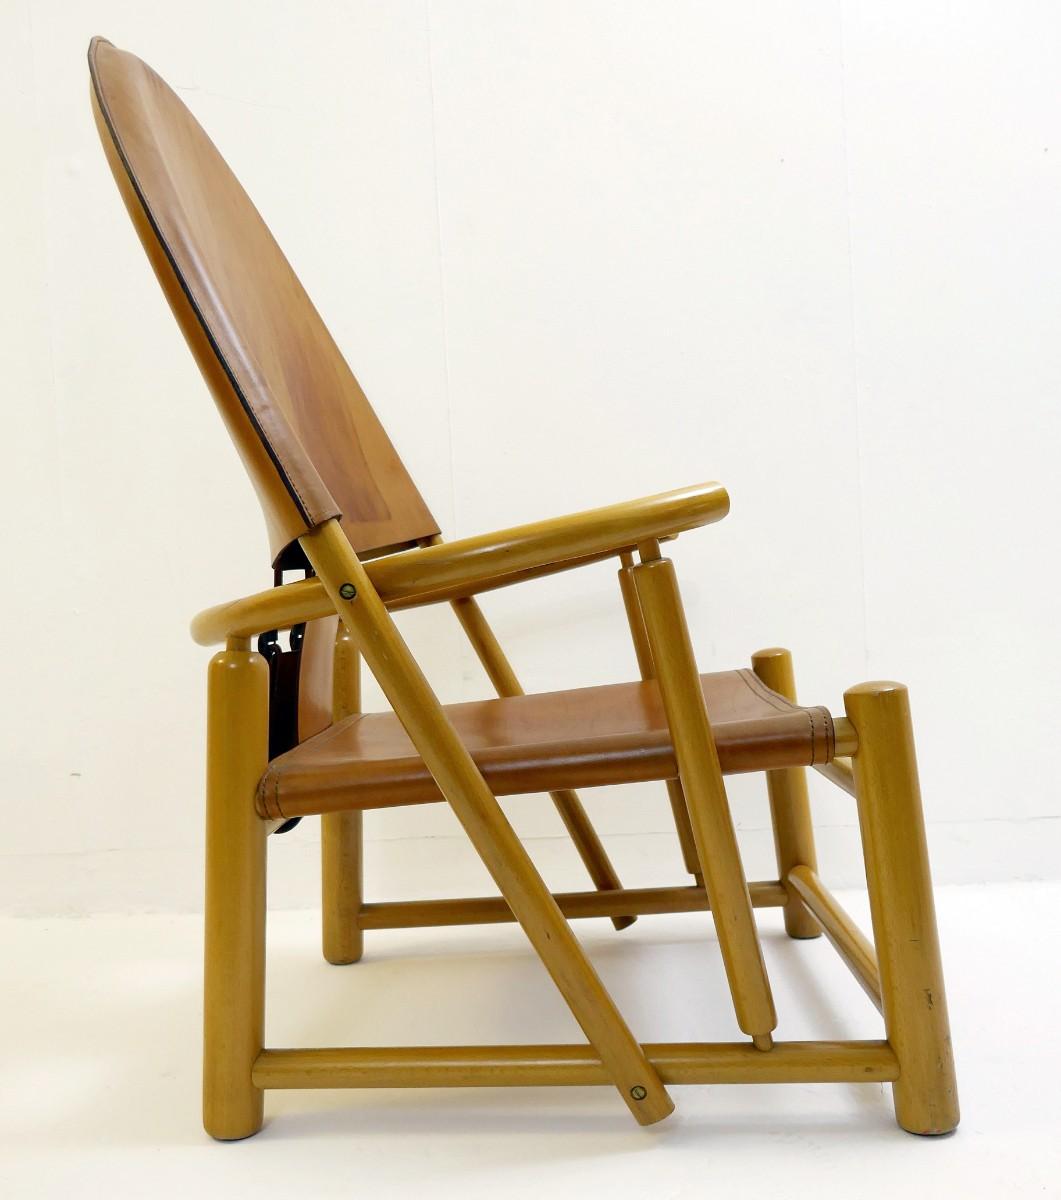 'Hoop' Lounge Chair by Piero Palange and Werther Toffoloni (Europäisch)